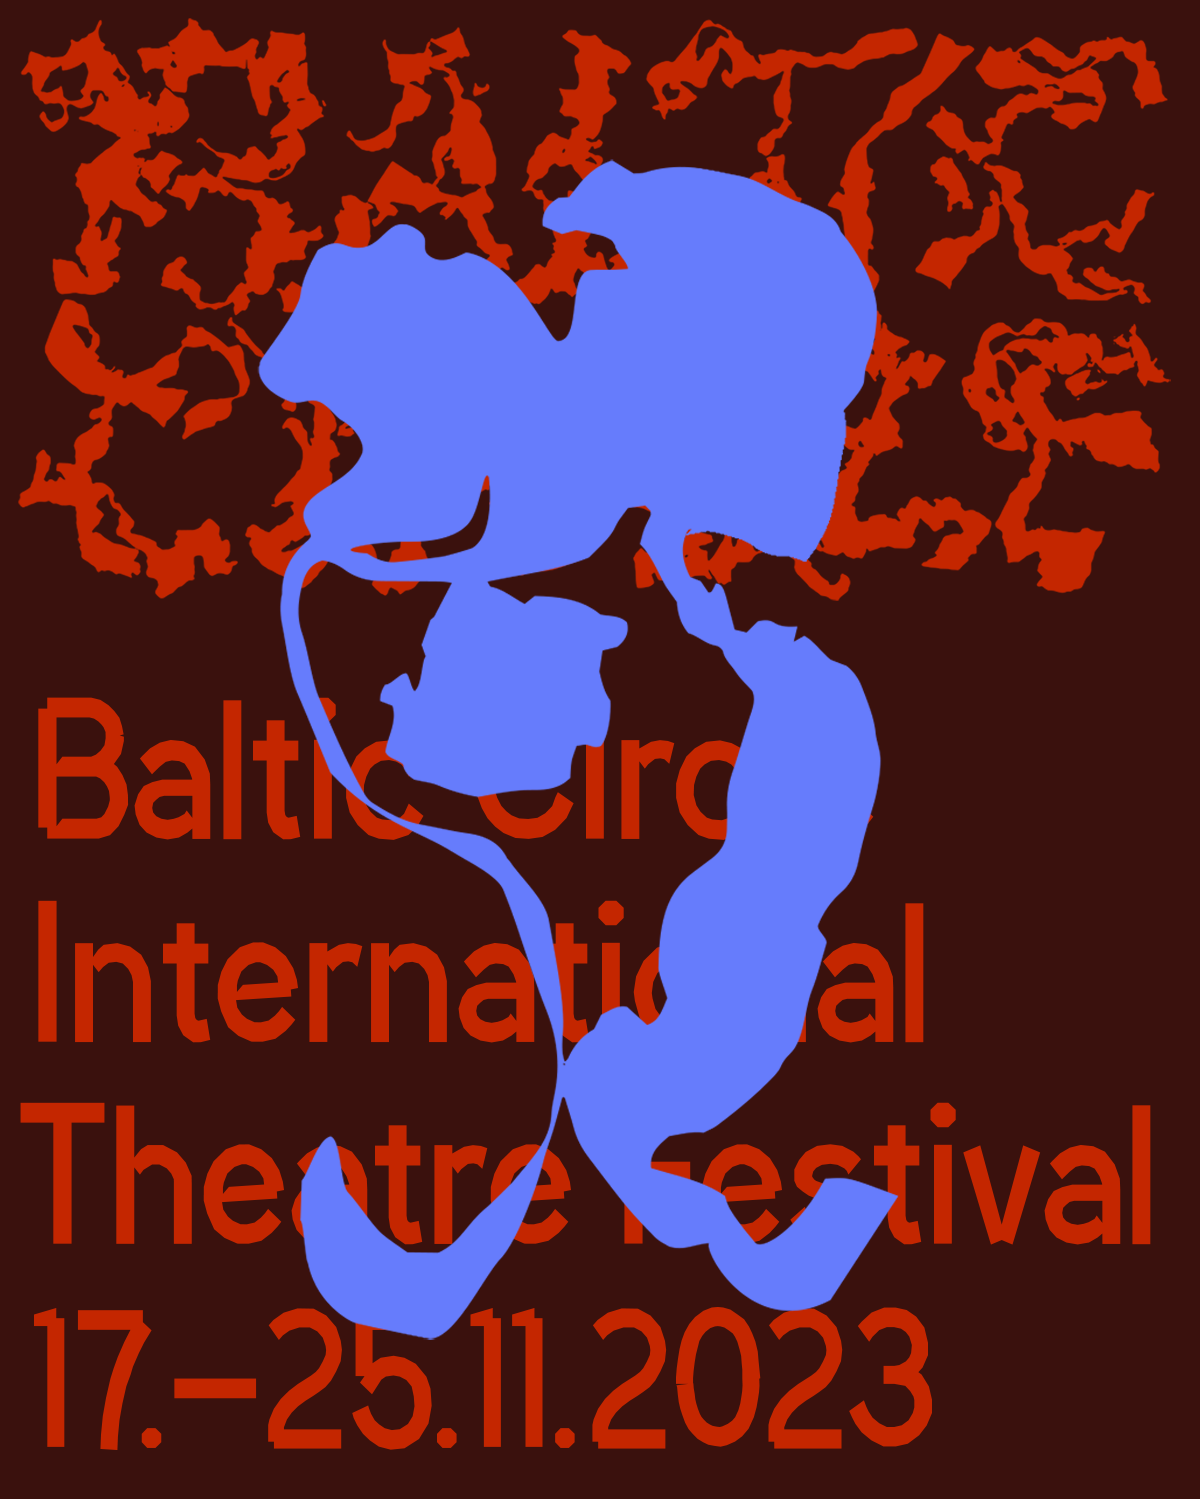 On a dark red background with bright red text "Baltic Circle International Theater Festival 17.-25.11.2023. There is also a tattered looking text in the same bright red on the top edge. You can't really distinguish what it says from the text. Above everything is a large inkblot-looking light blue symbol.